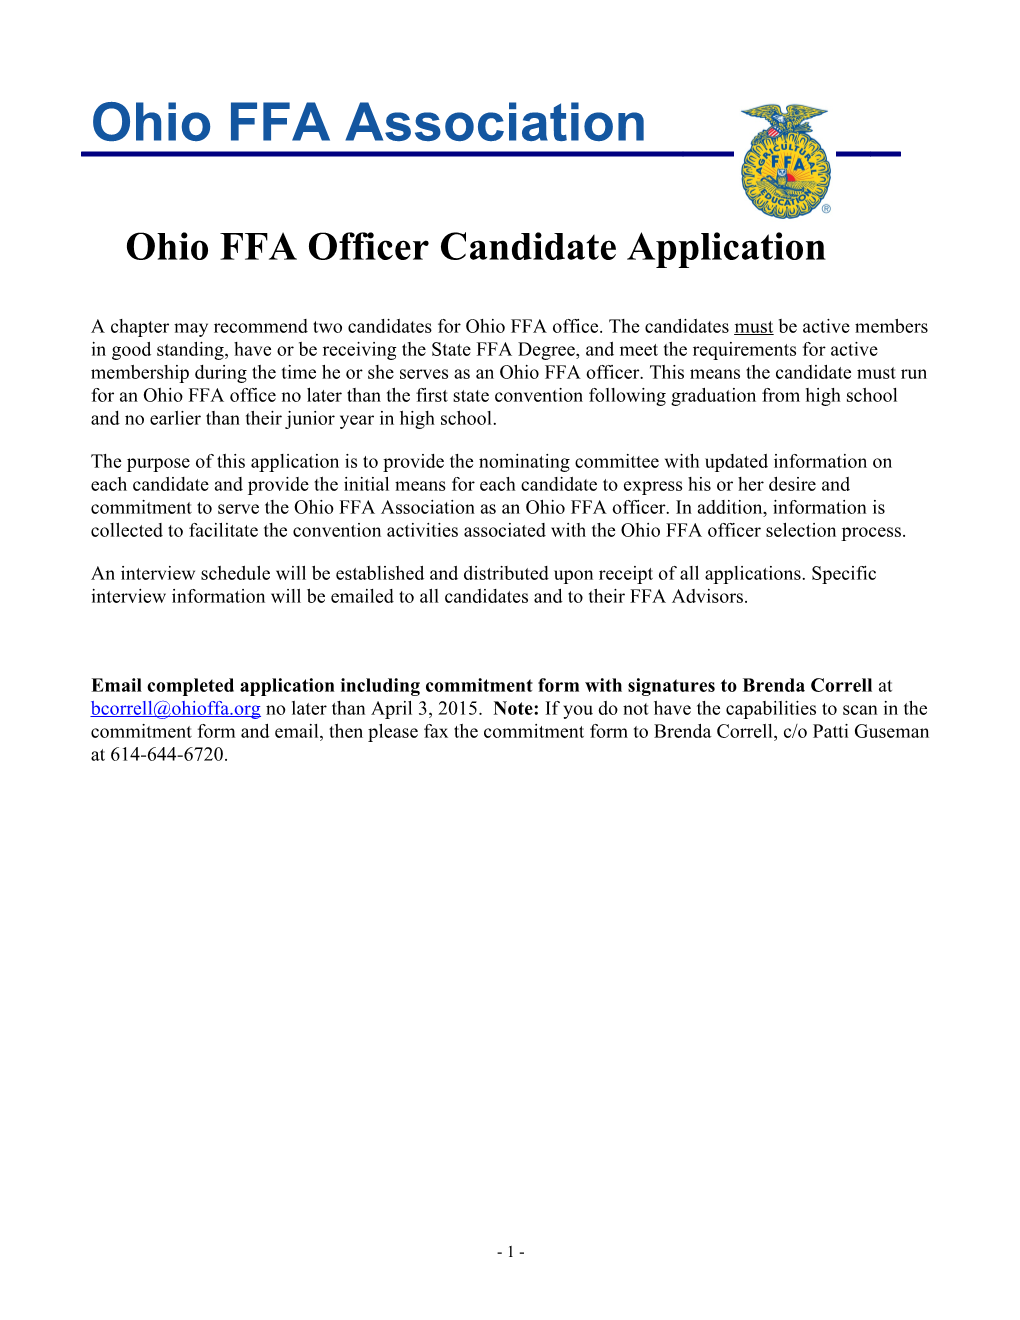 The Purpose of This Application Is to Provide the Nominating Committee with Updated Information